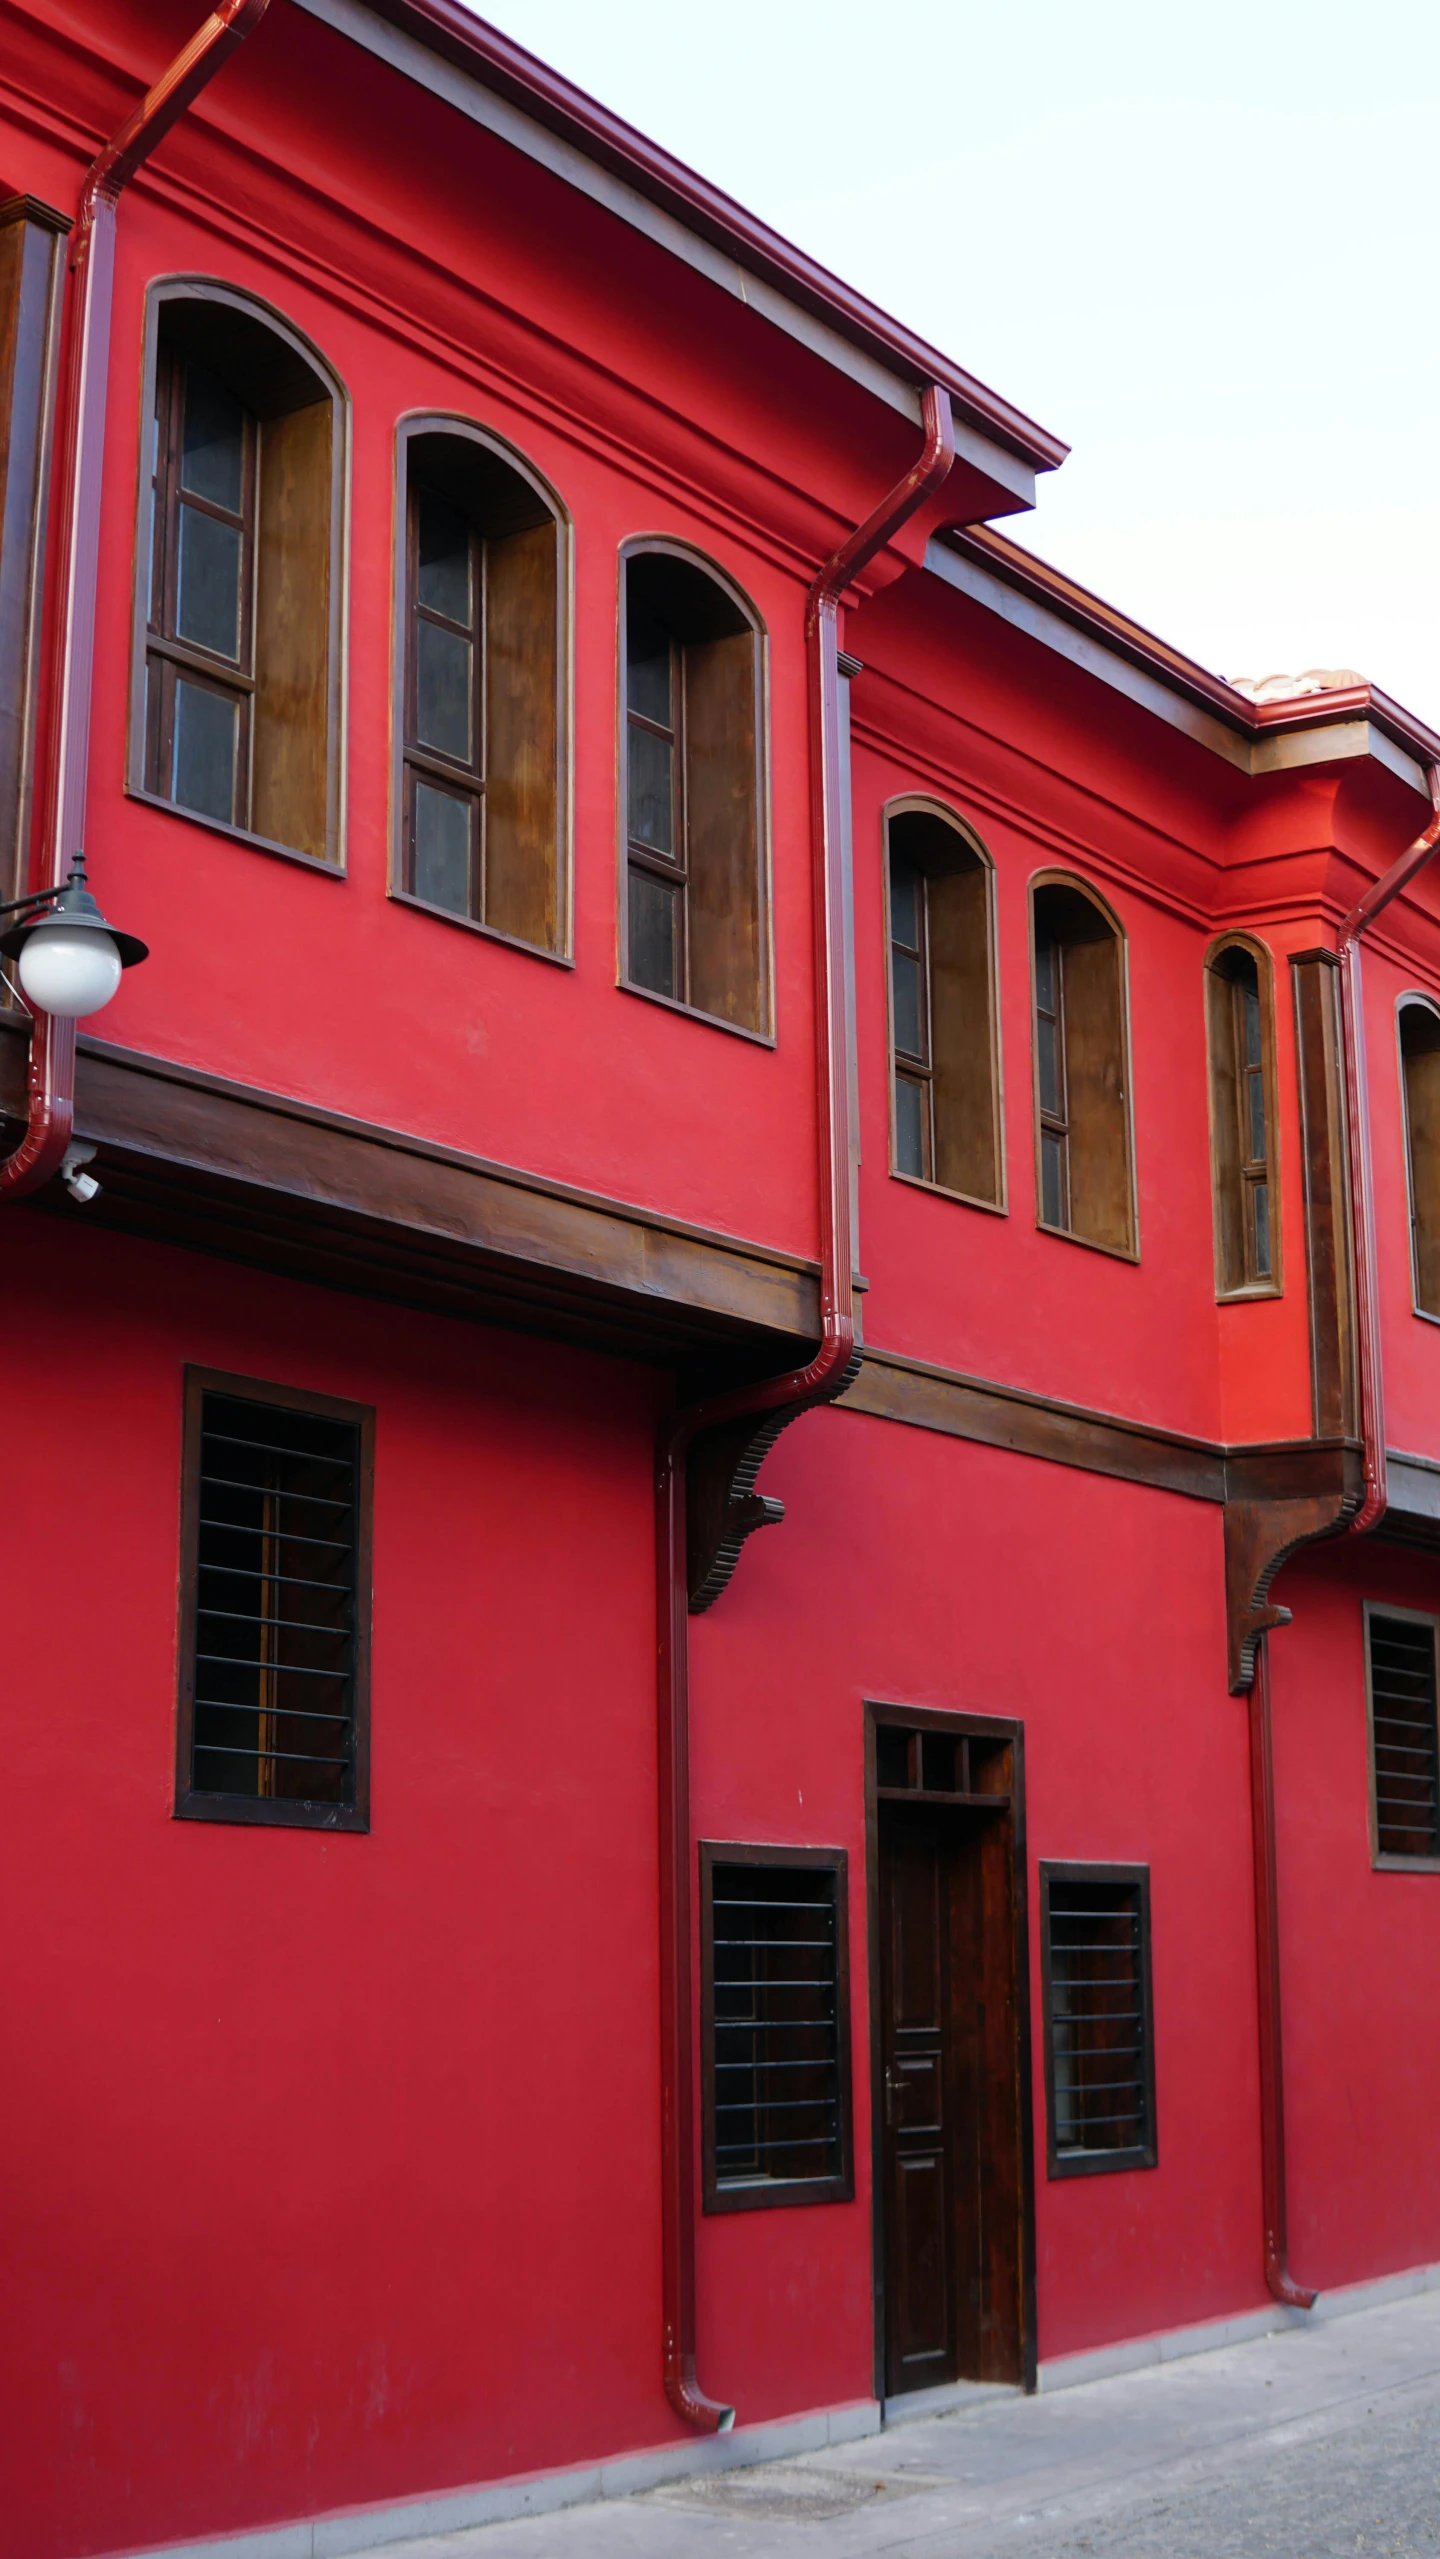 the side of a building with red walls and shutters